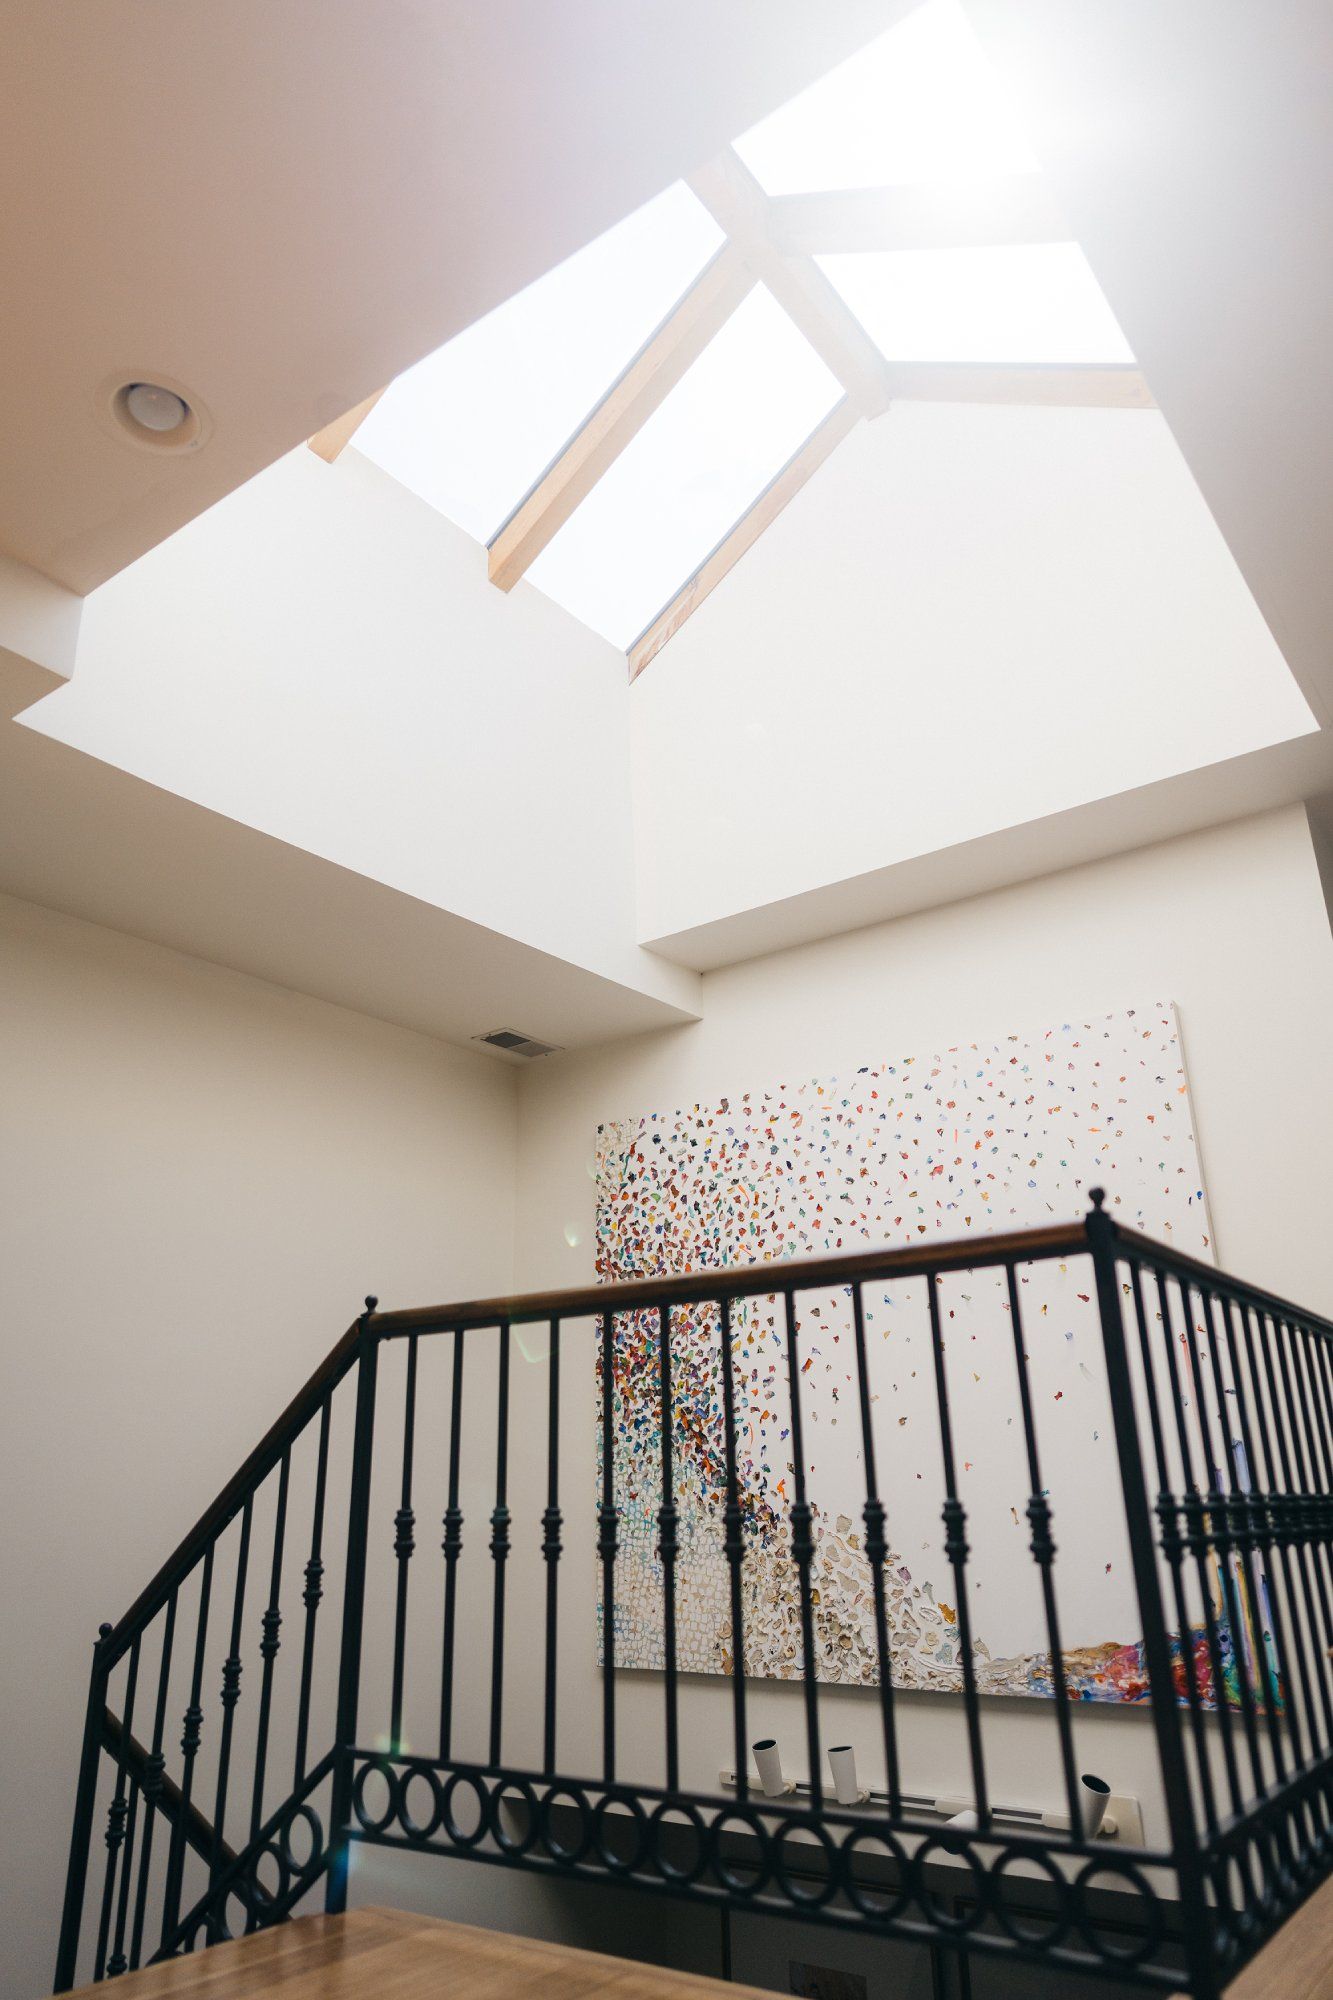 A modern interior with bright skylight, white walls, and colourful abstract wall art, complemented by a decorative black wrought iron railing